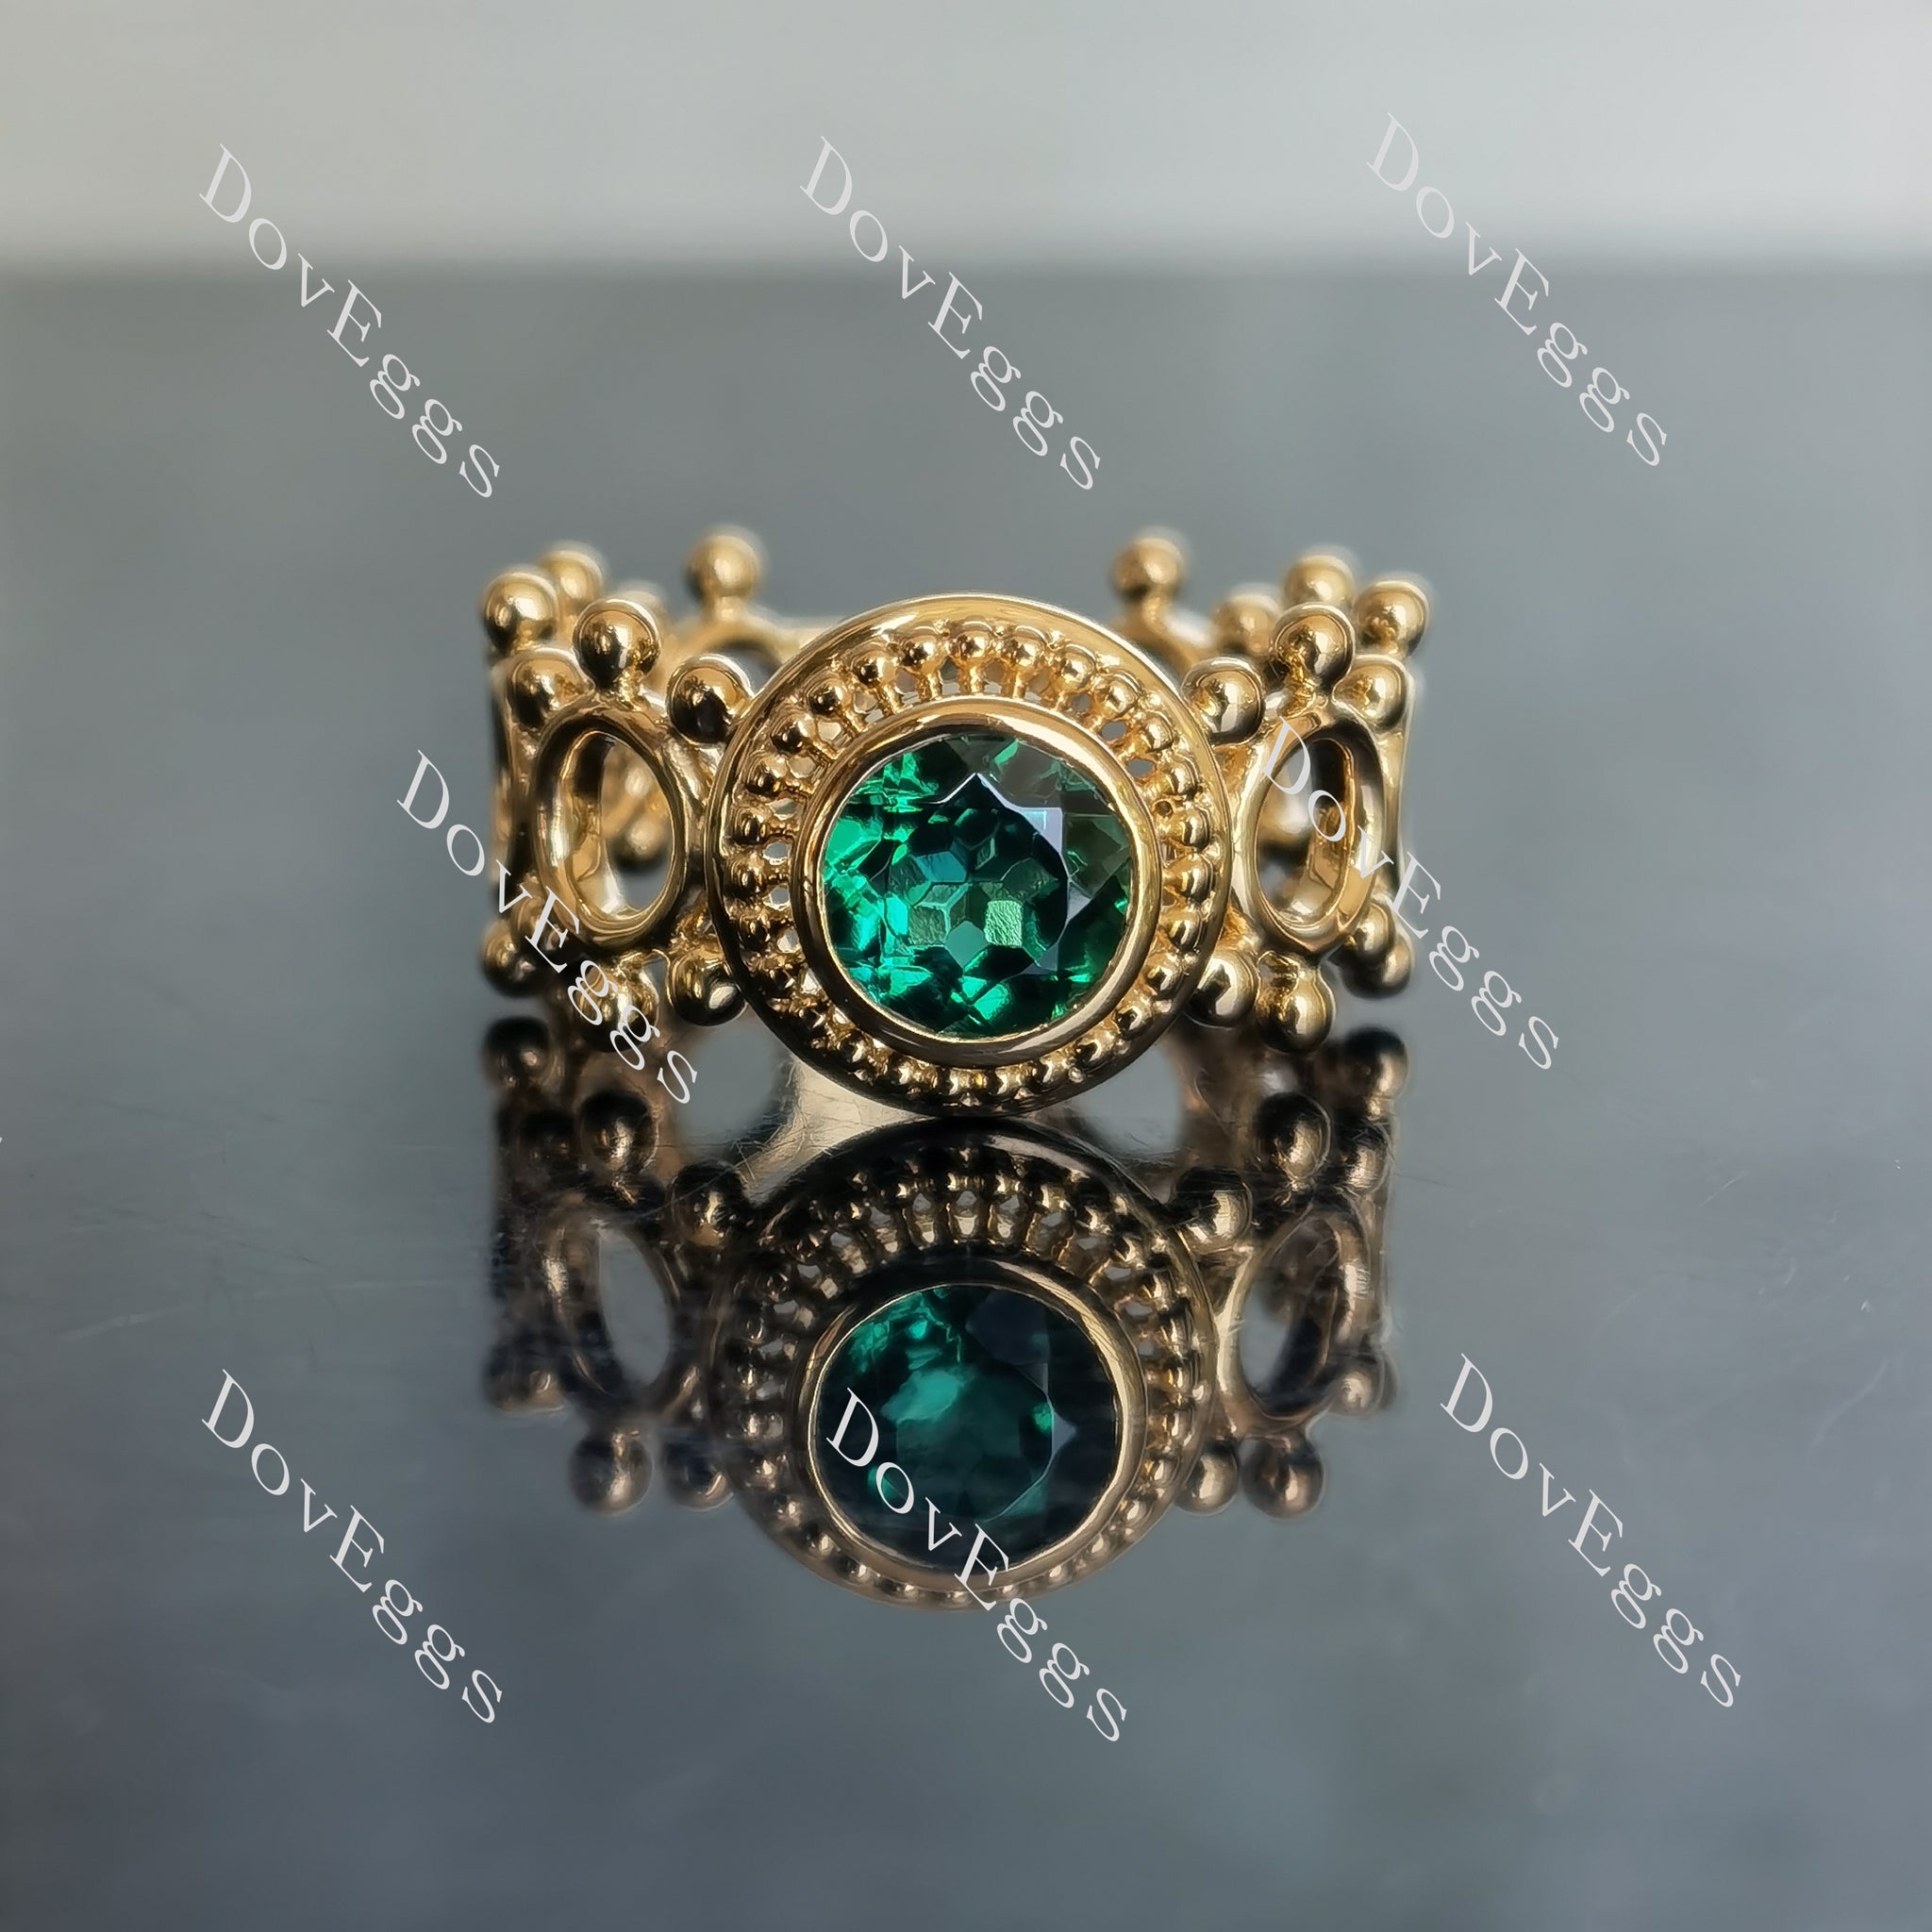 DovEggs round vintage hollow out colored gem engagement ring